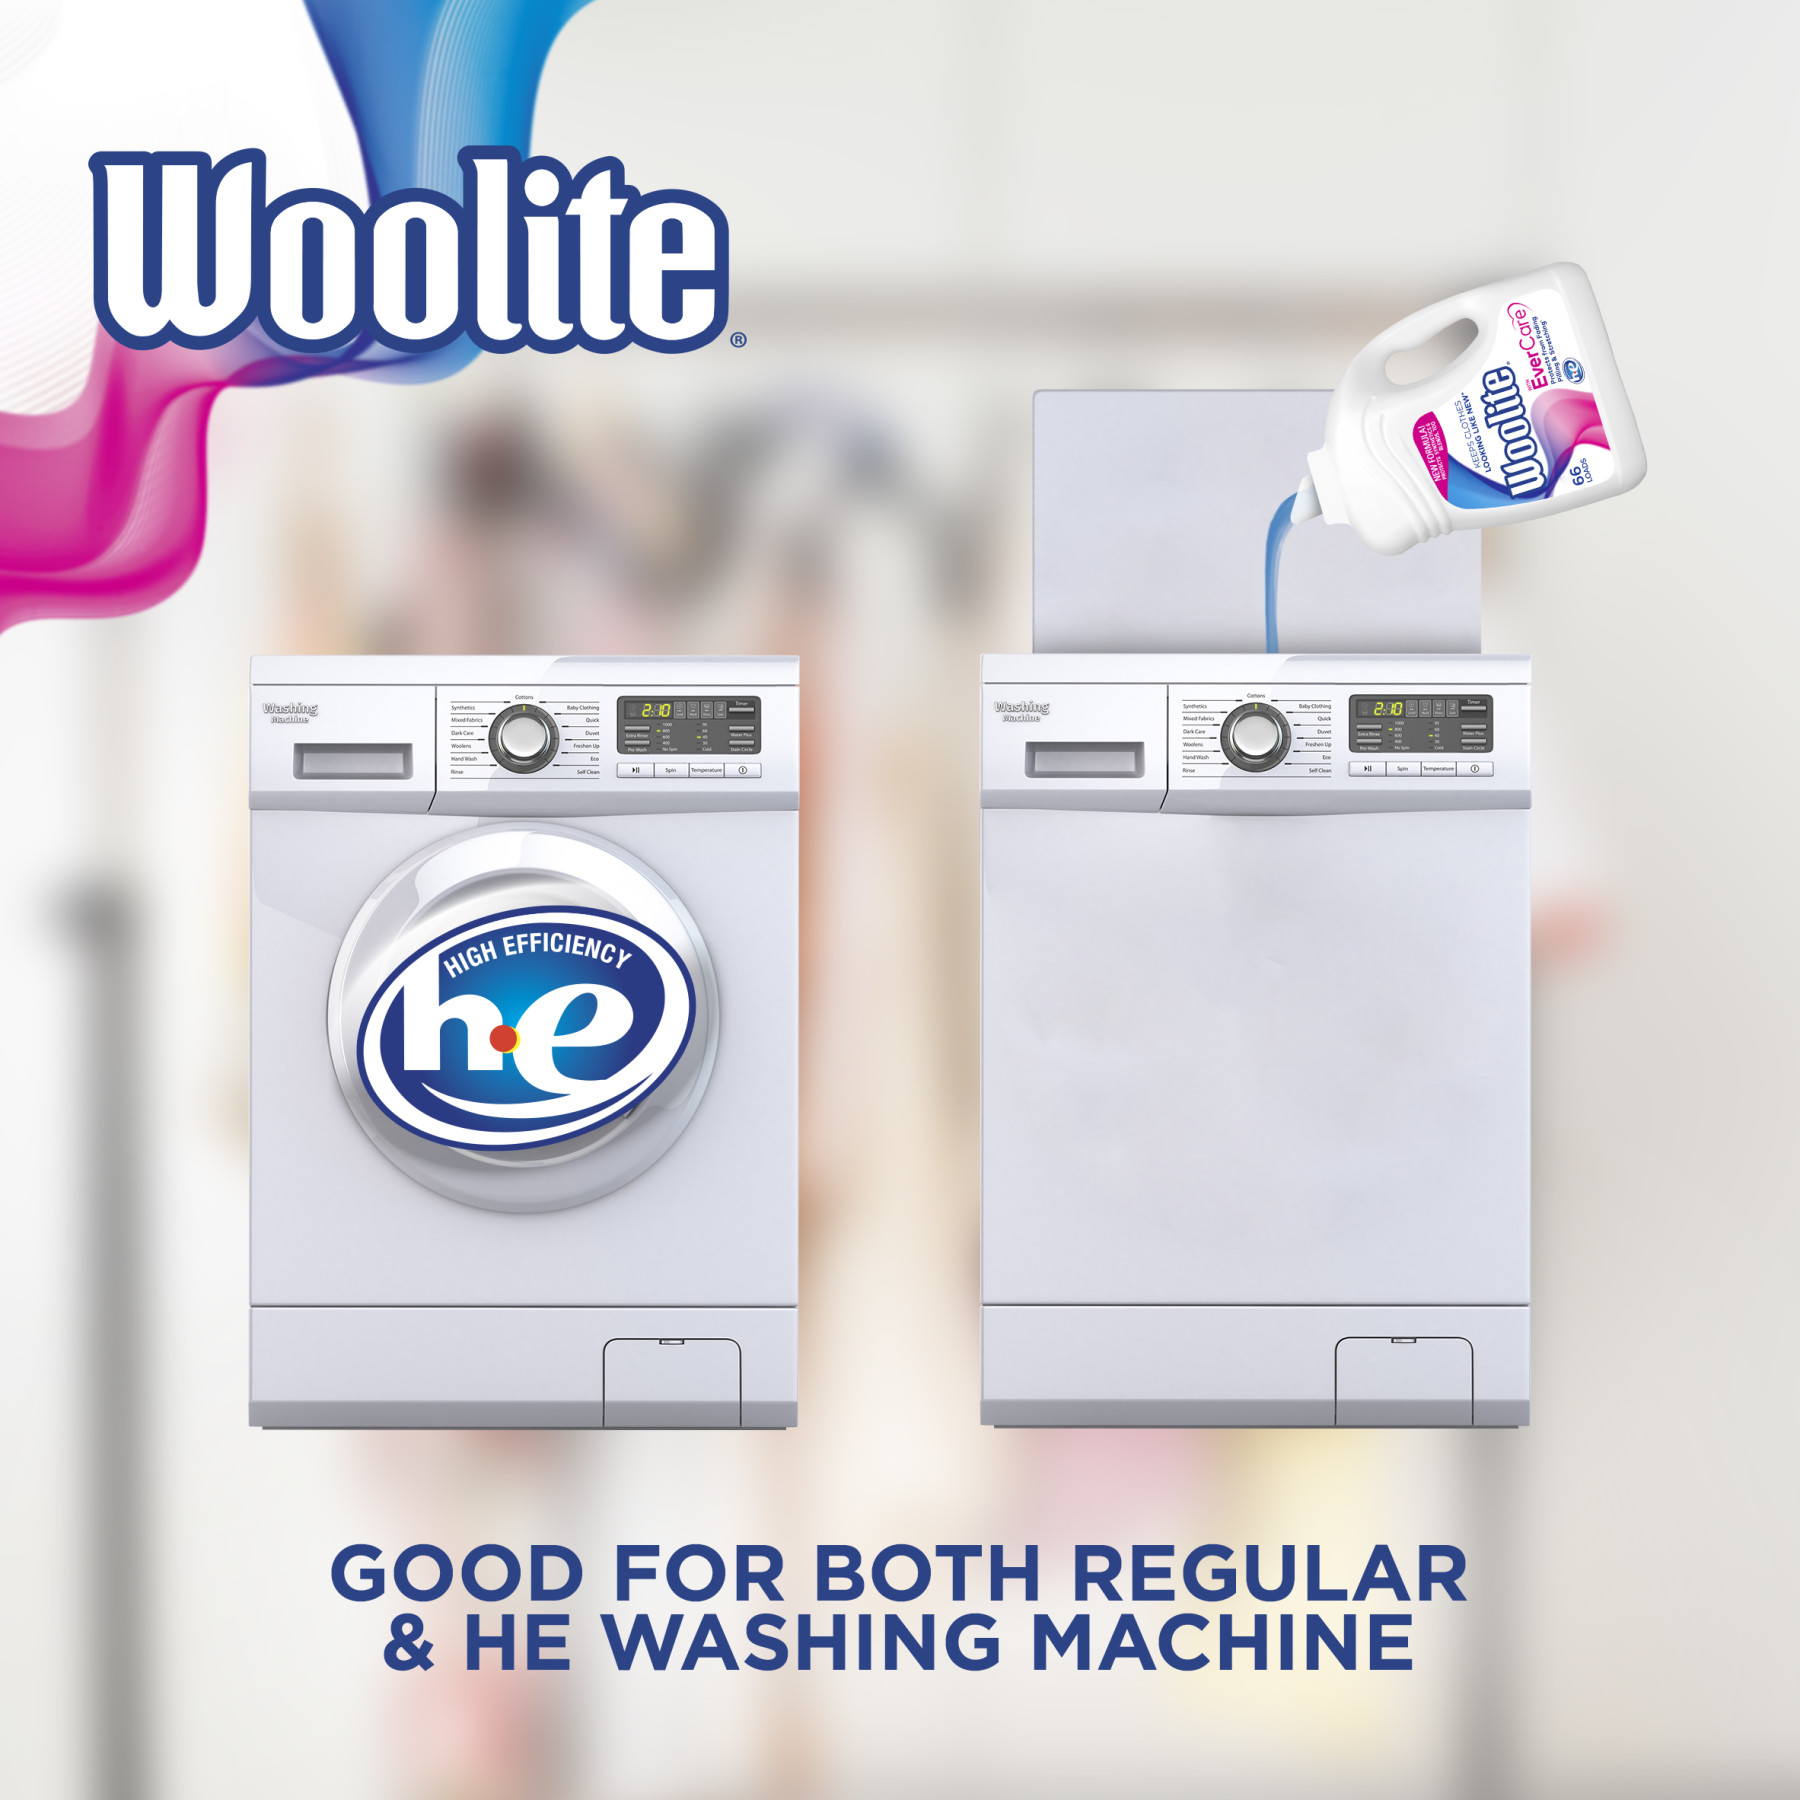 Woolite All Clothes Liquid Laundry Detergent, Sparkling Falls Scent, 83 Loads , 125oz, Regular & HE Washers, Gentle Cycle, , Packaging May Vary - image 5 of 6